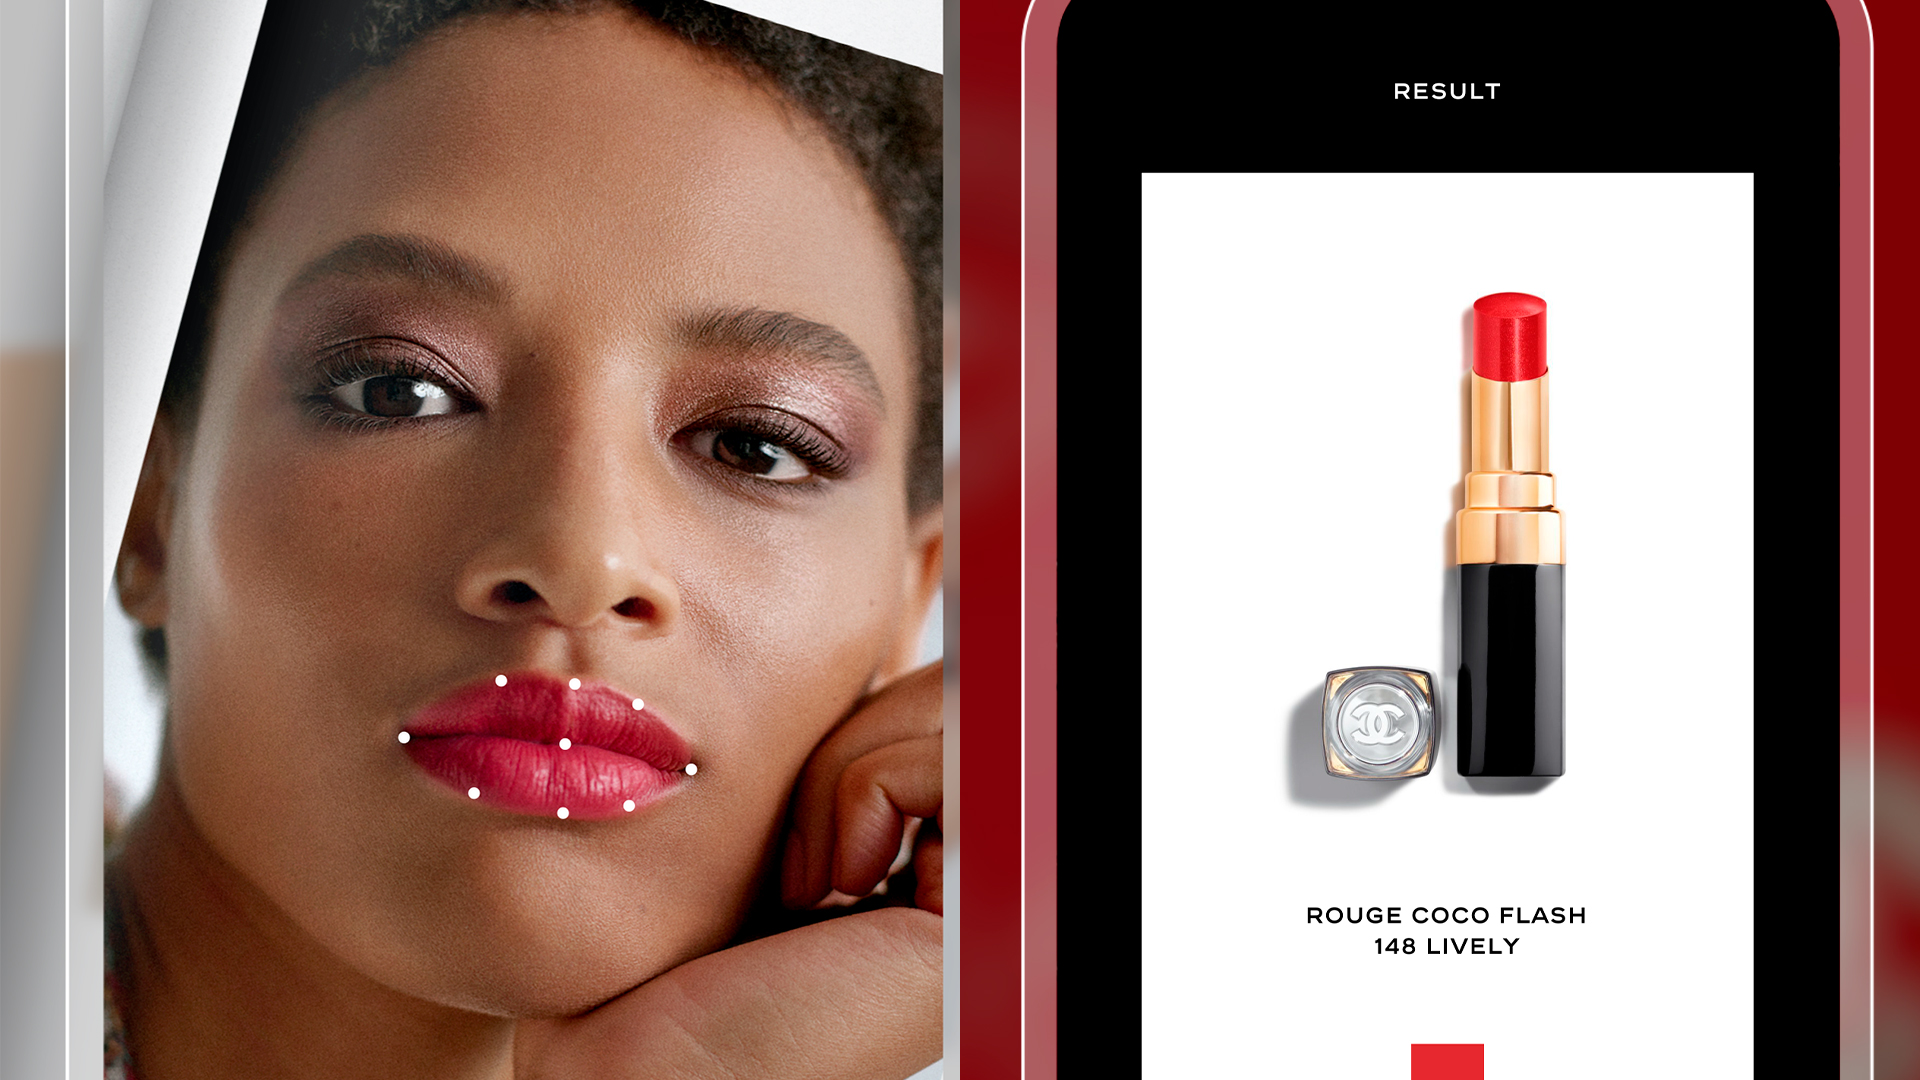 Transform your favorite color into lipstick with the Chanel Lipscanner app  | Woman & Home